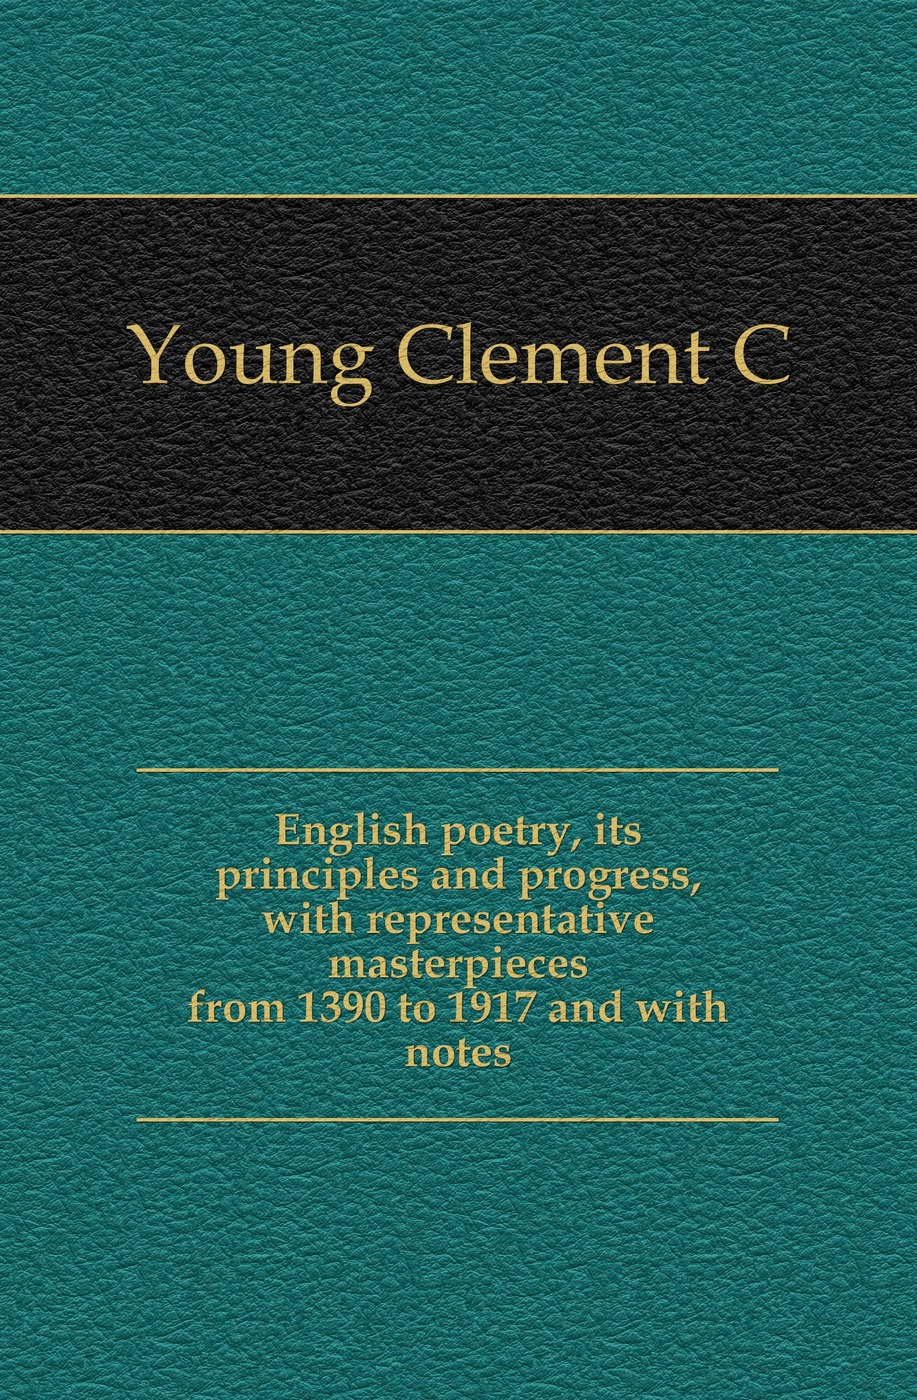 English poetry, its principles and progress, with representative masterpieces from 1390 to 1917 and with notes